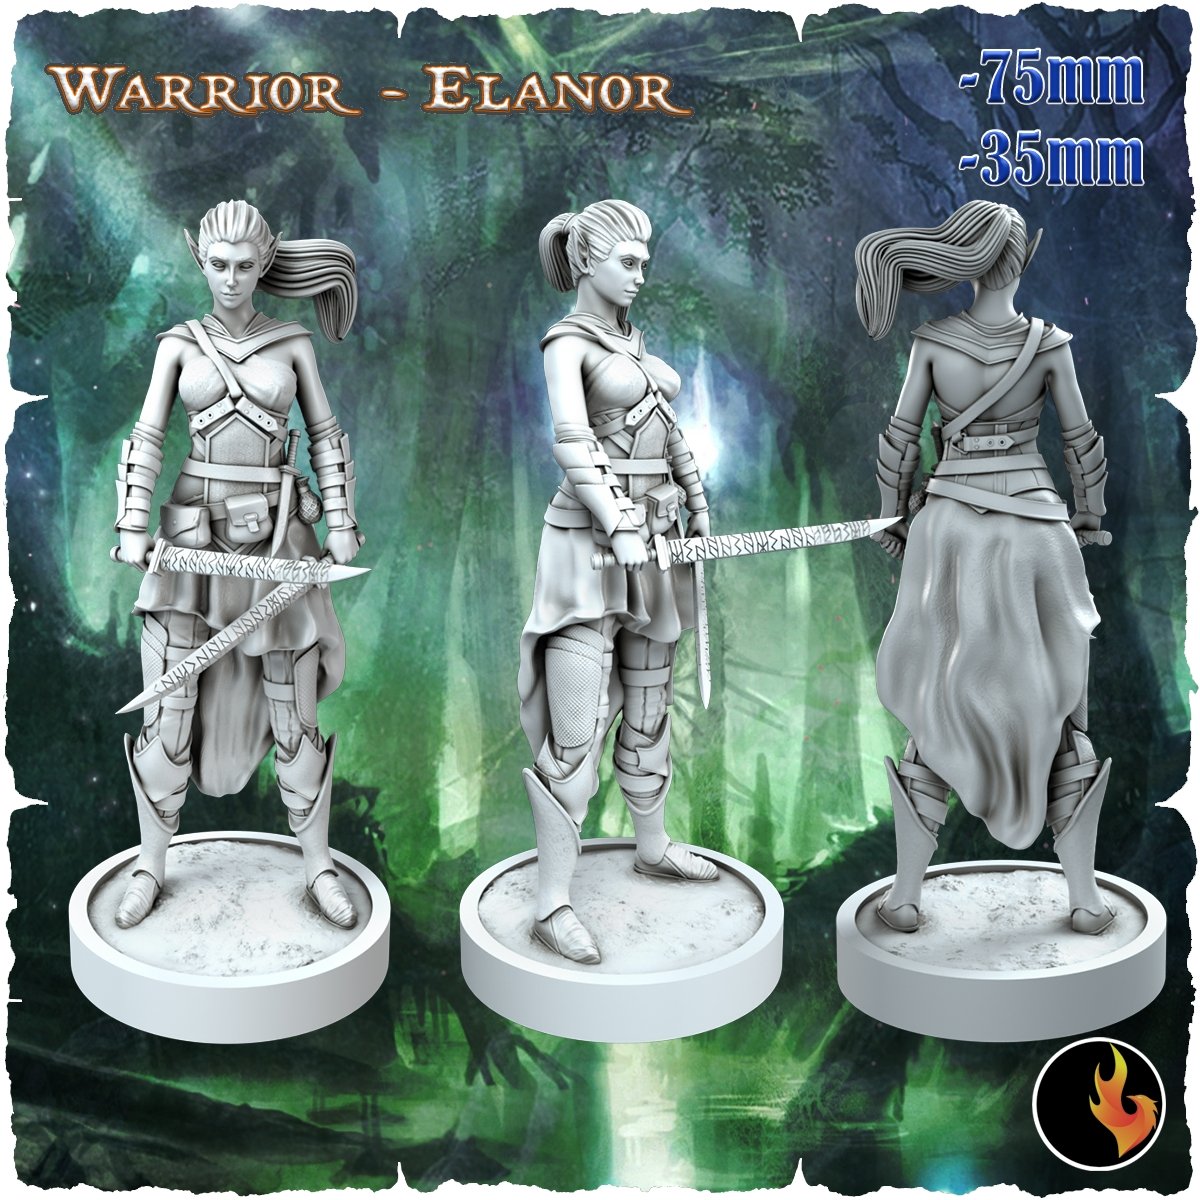 Elanor 3d Printed miniature FanArt by Ravi Sampath Scaled Collectables Statues & Figurines